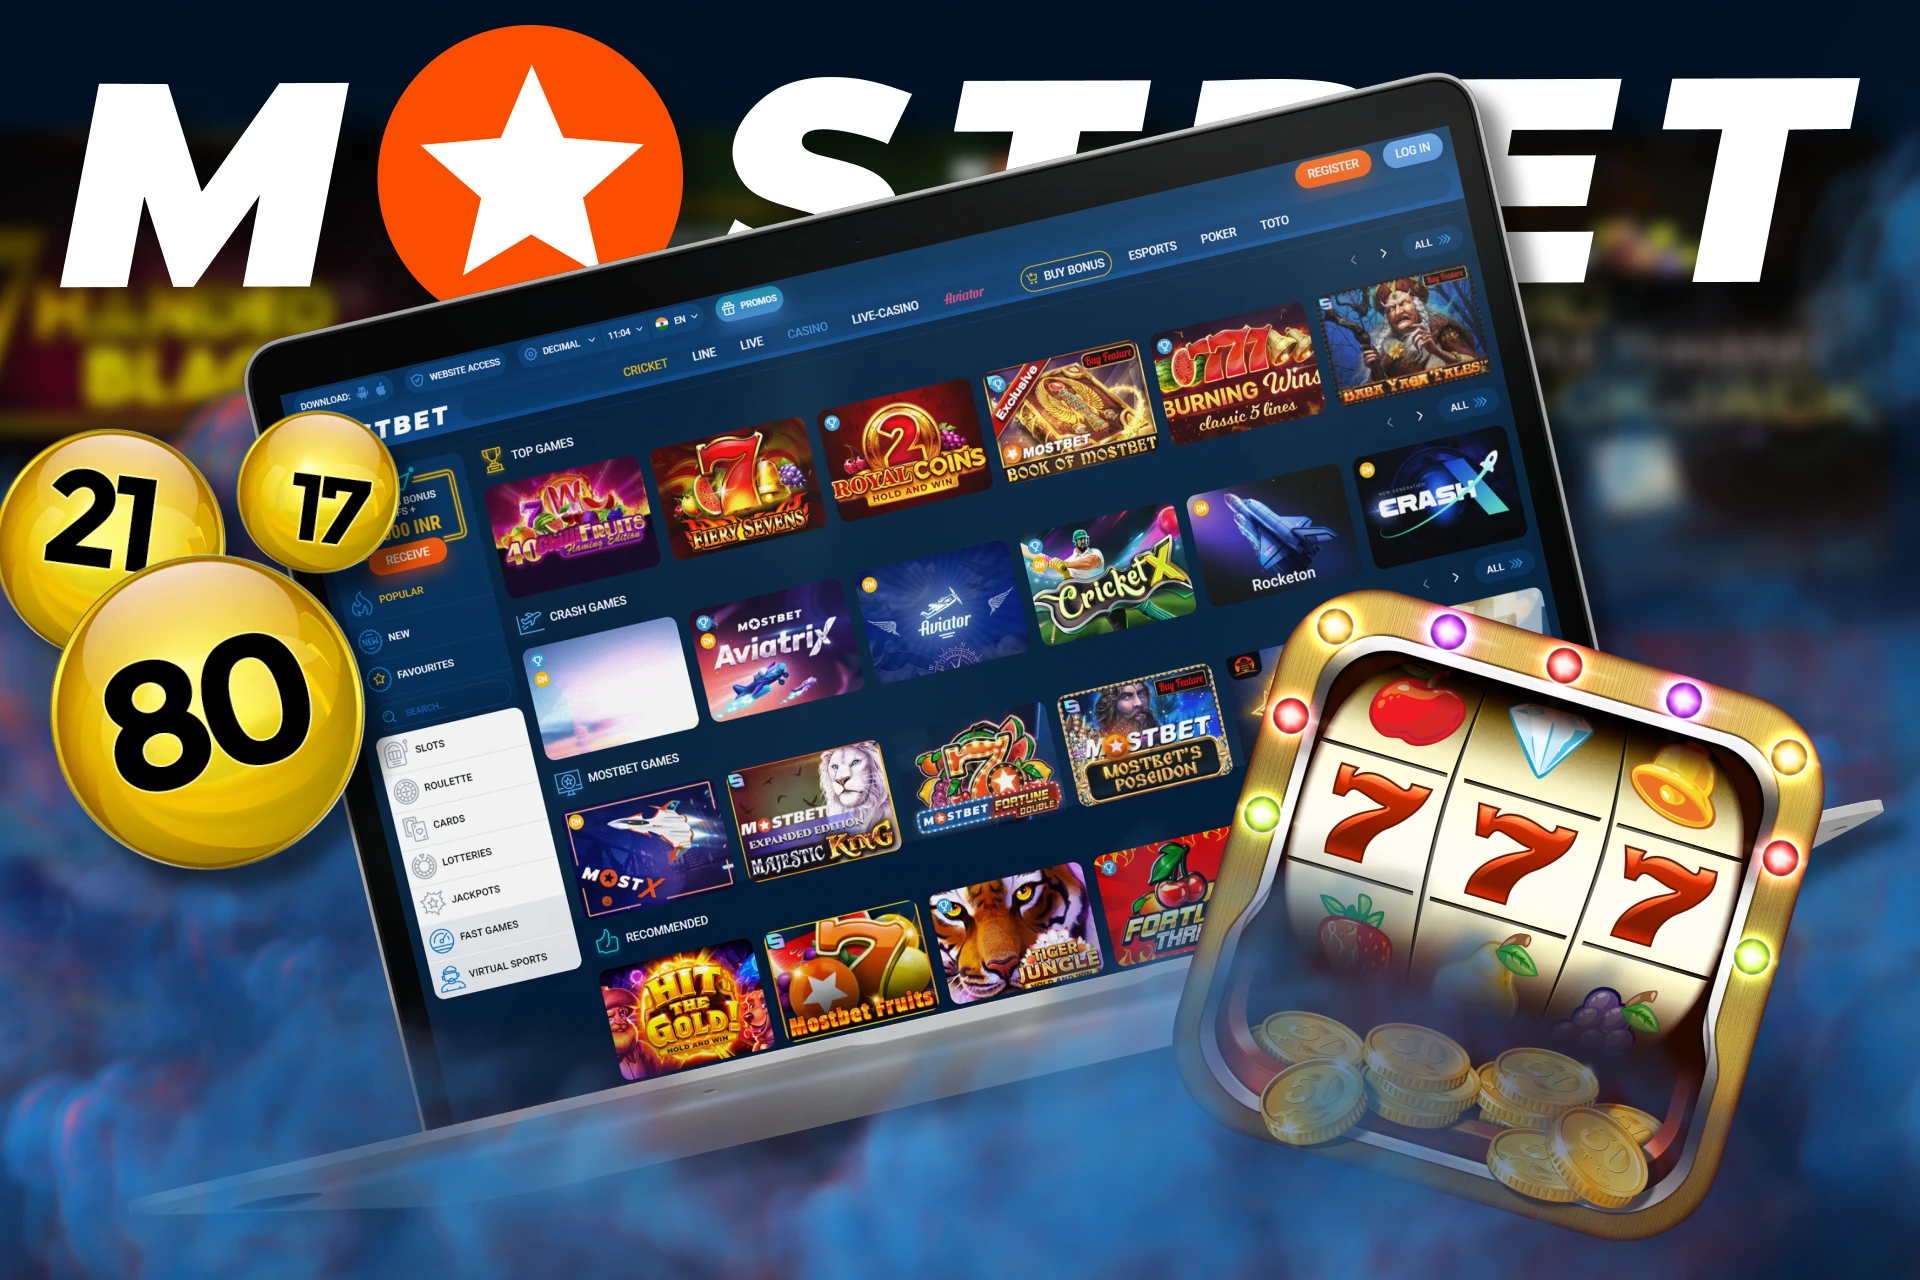 You can play Blackjack and other casino games at Mostbet.